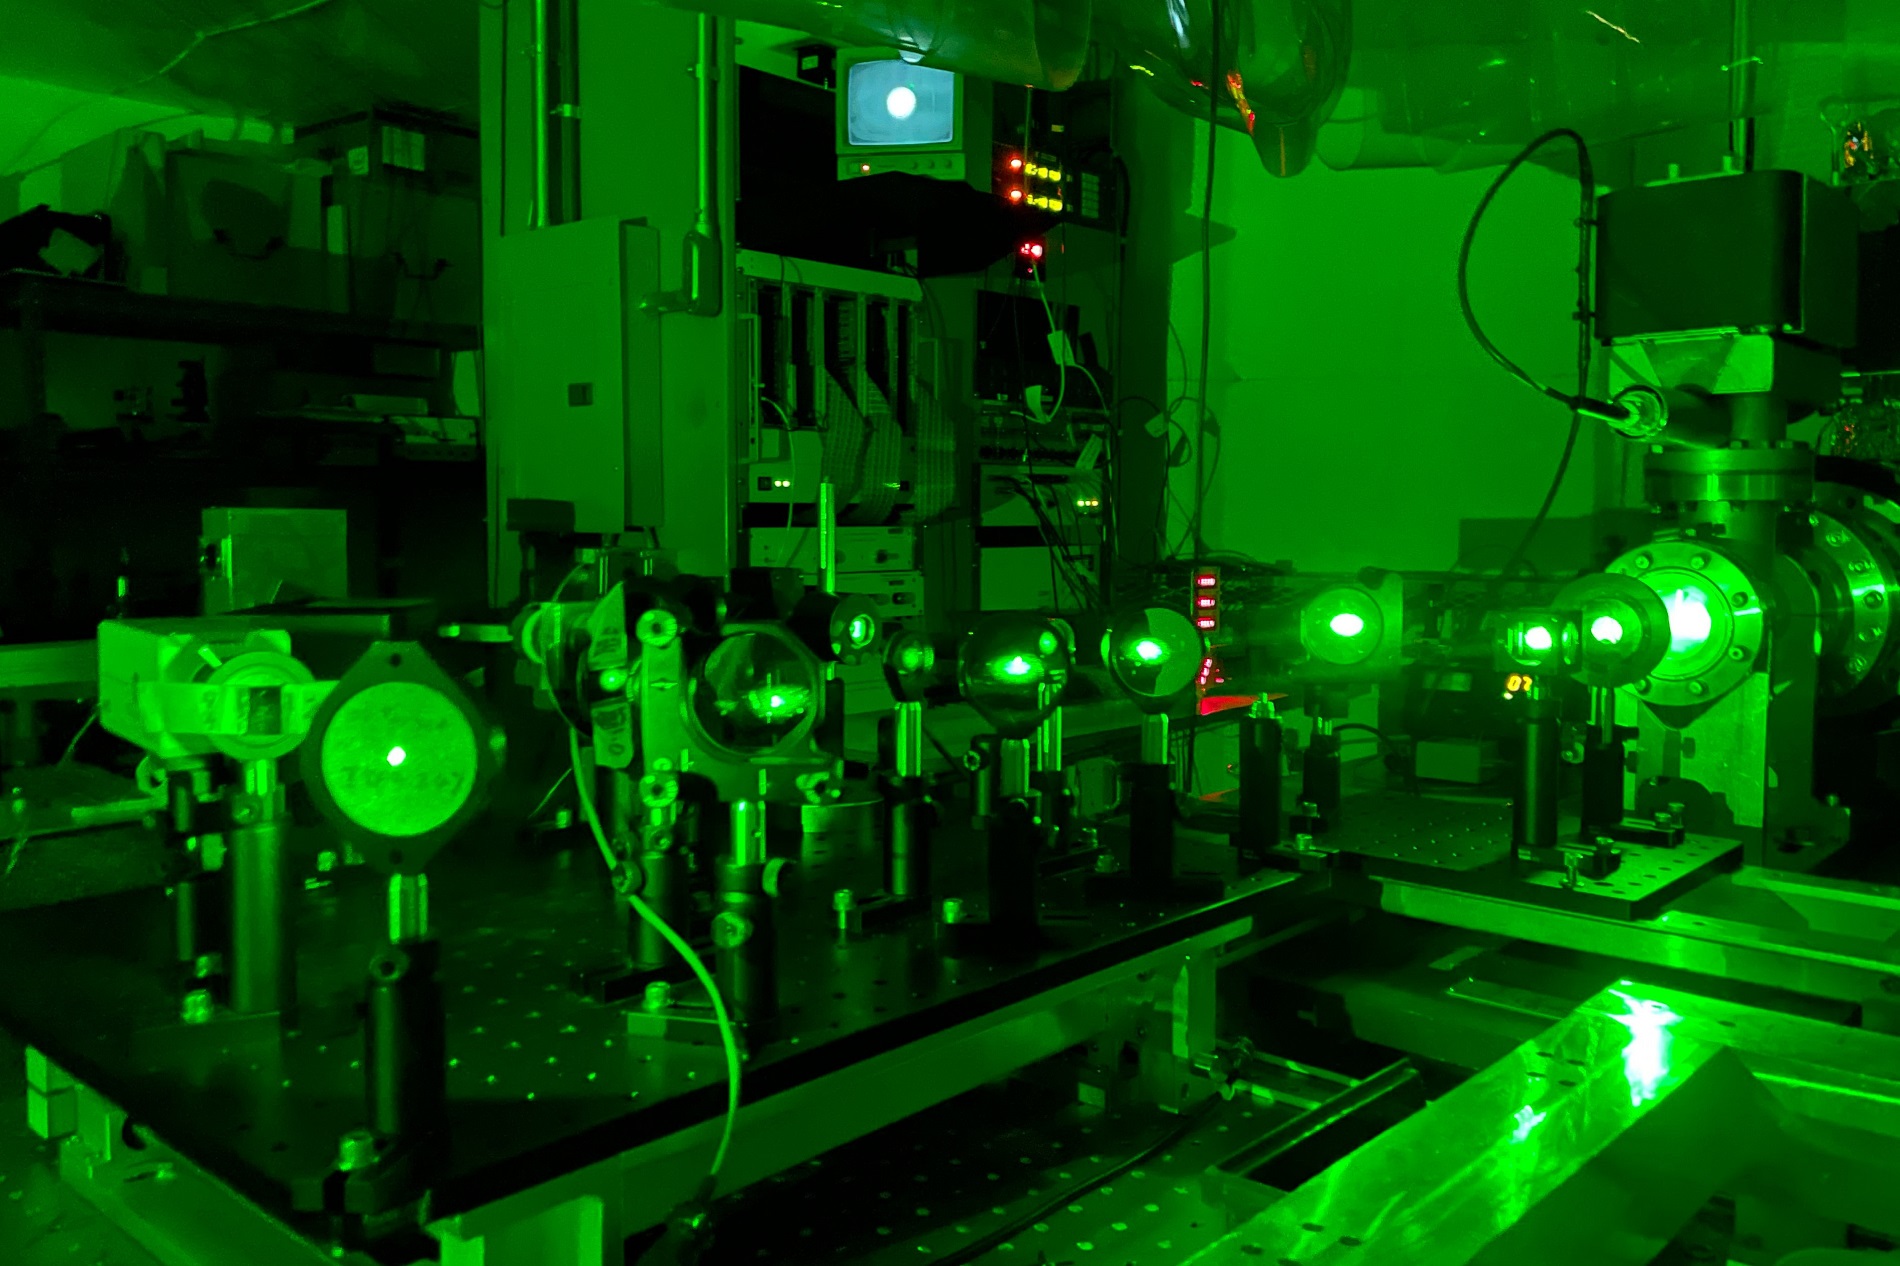 This storage ring free-electron laser from Triangle University Nuclear Laboratory enabled sub-170 nanometer lasing with LZH optics.